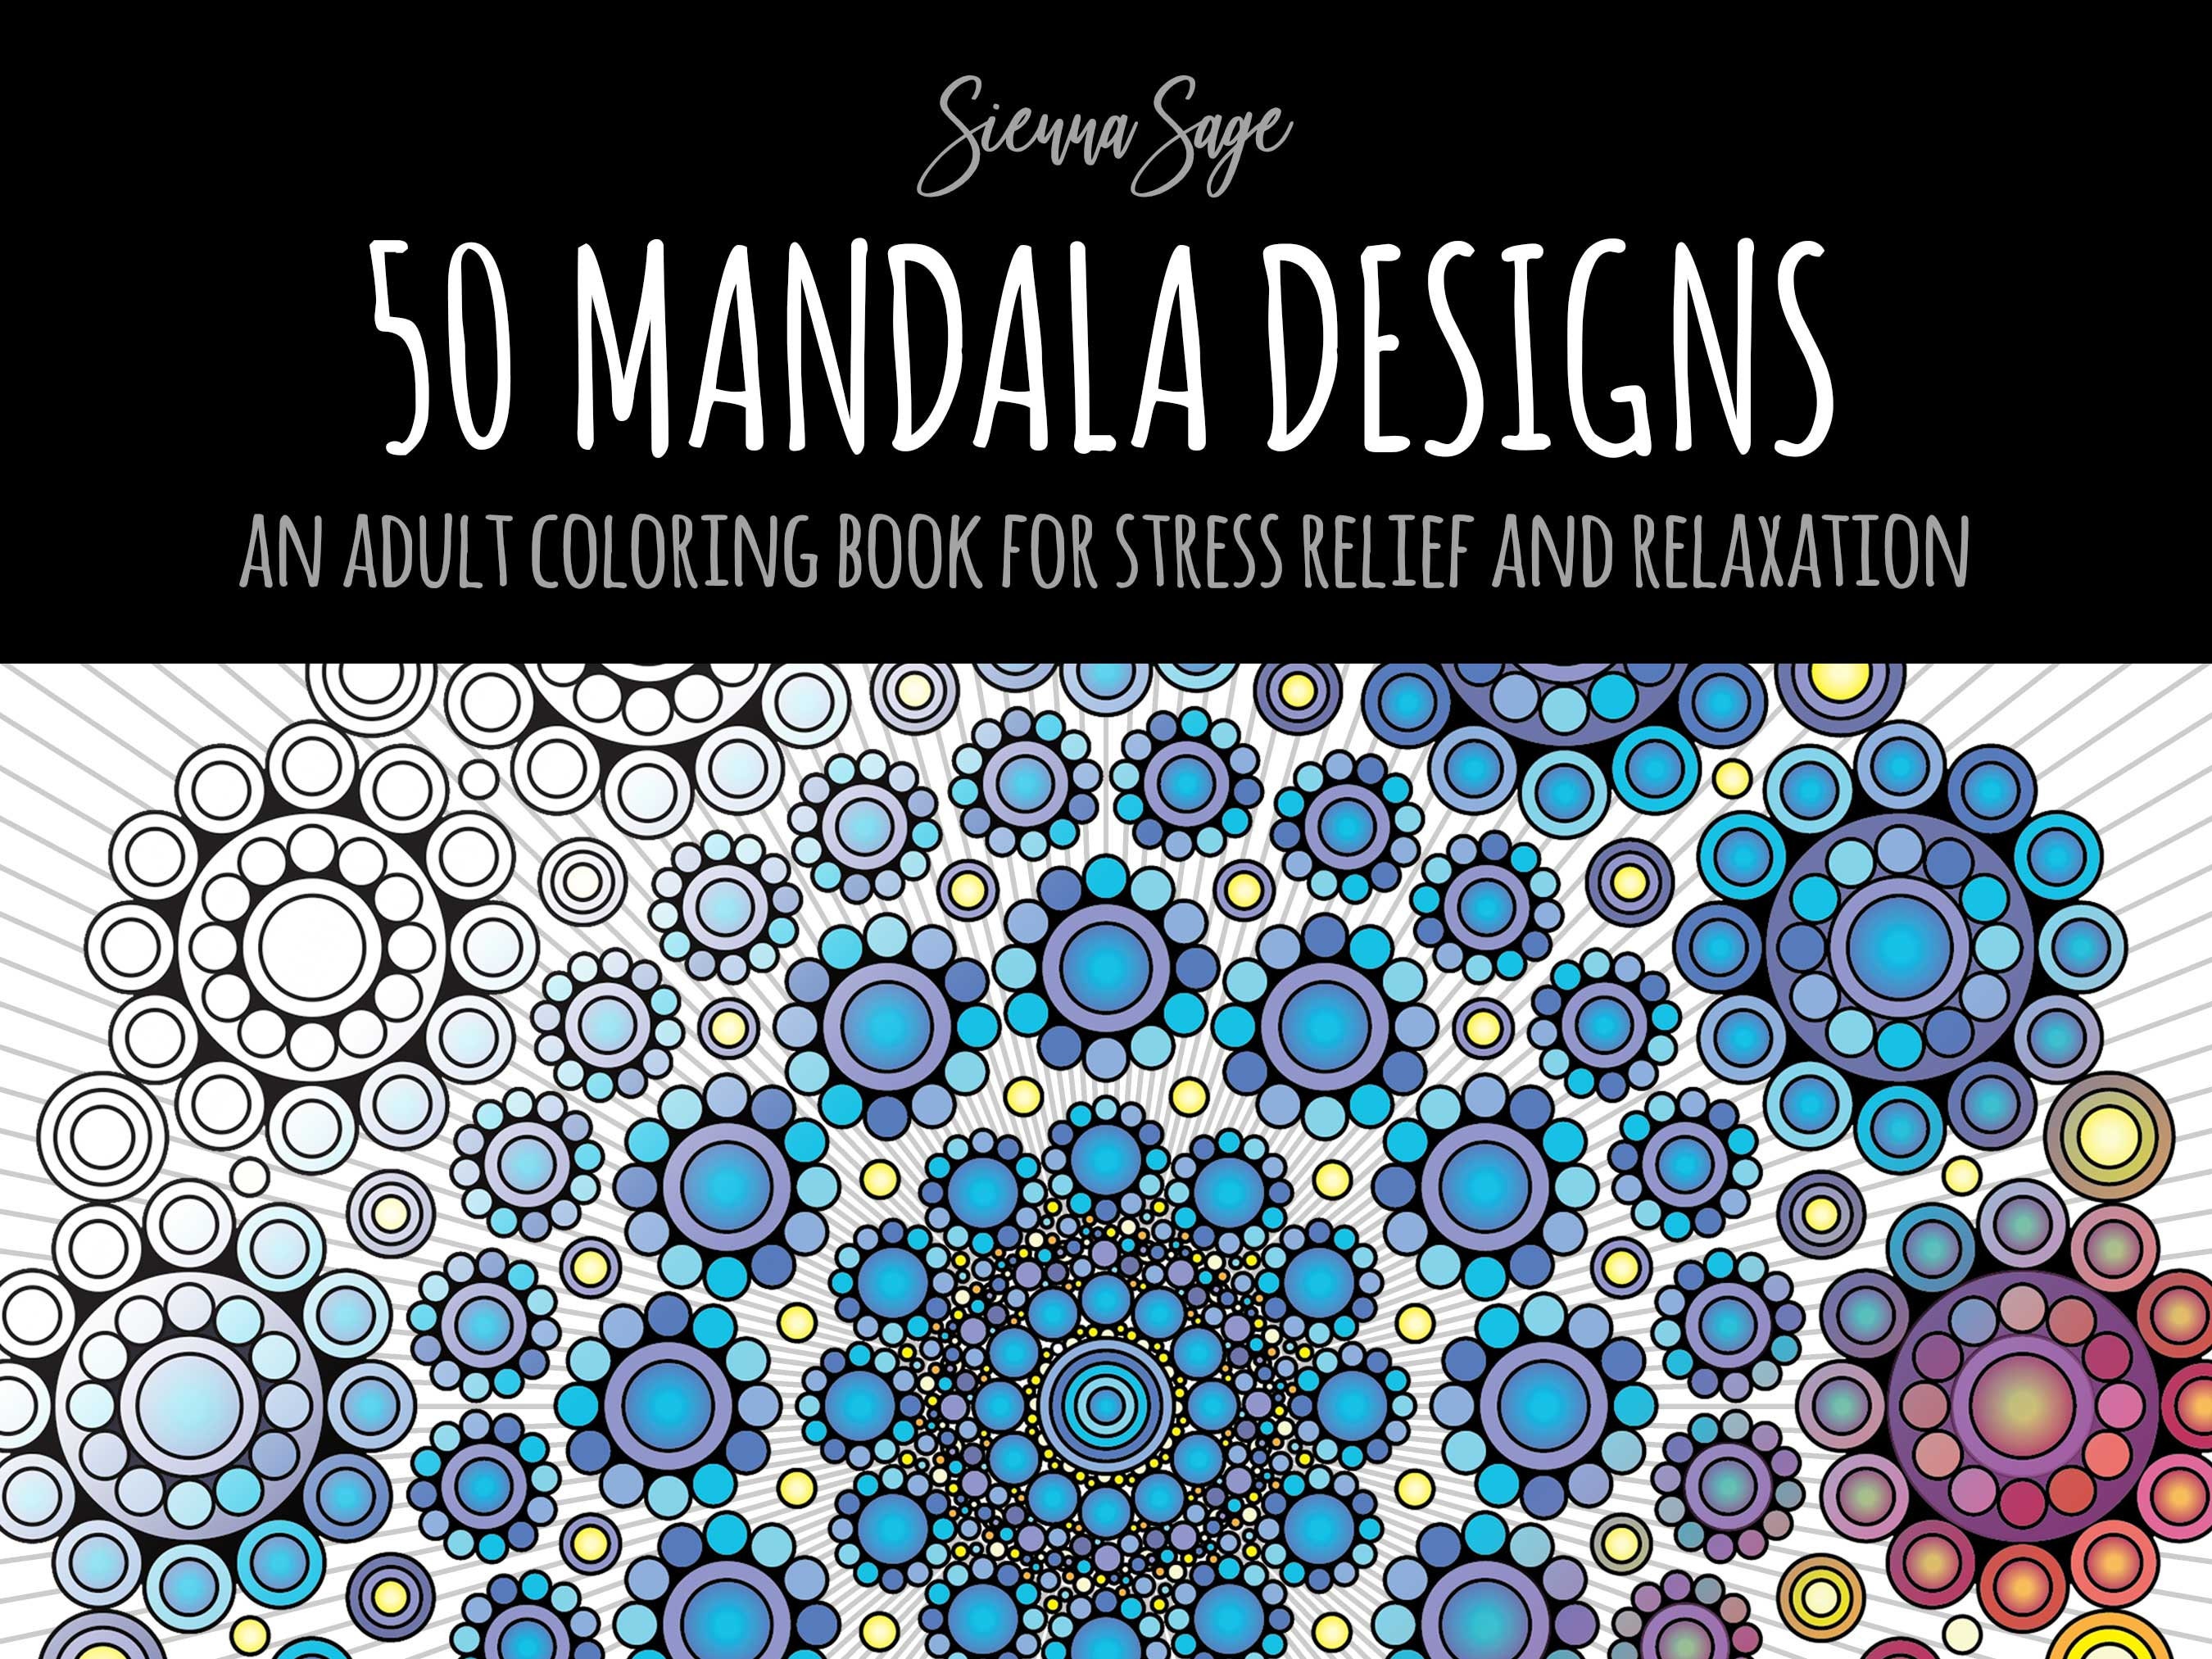 Adult Coloring Book Mandalas For Relaxation: Stress Relief Designs, A  Collection Of Original Calming Designs To help Relieve Stress And Anxiety  While (Paperback)